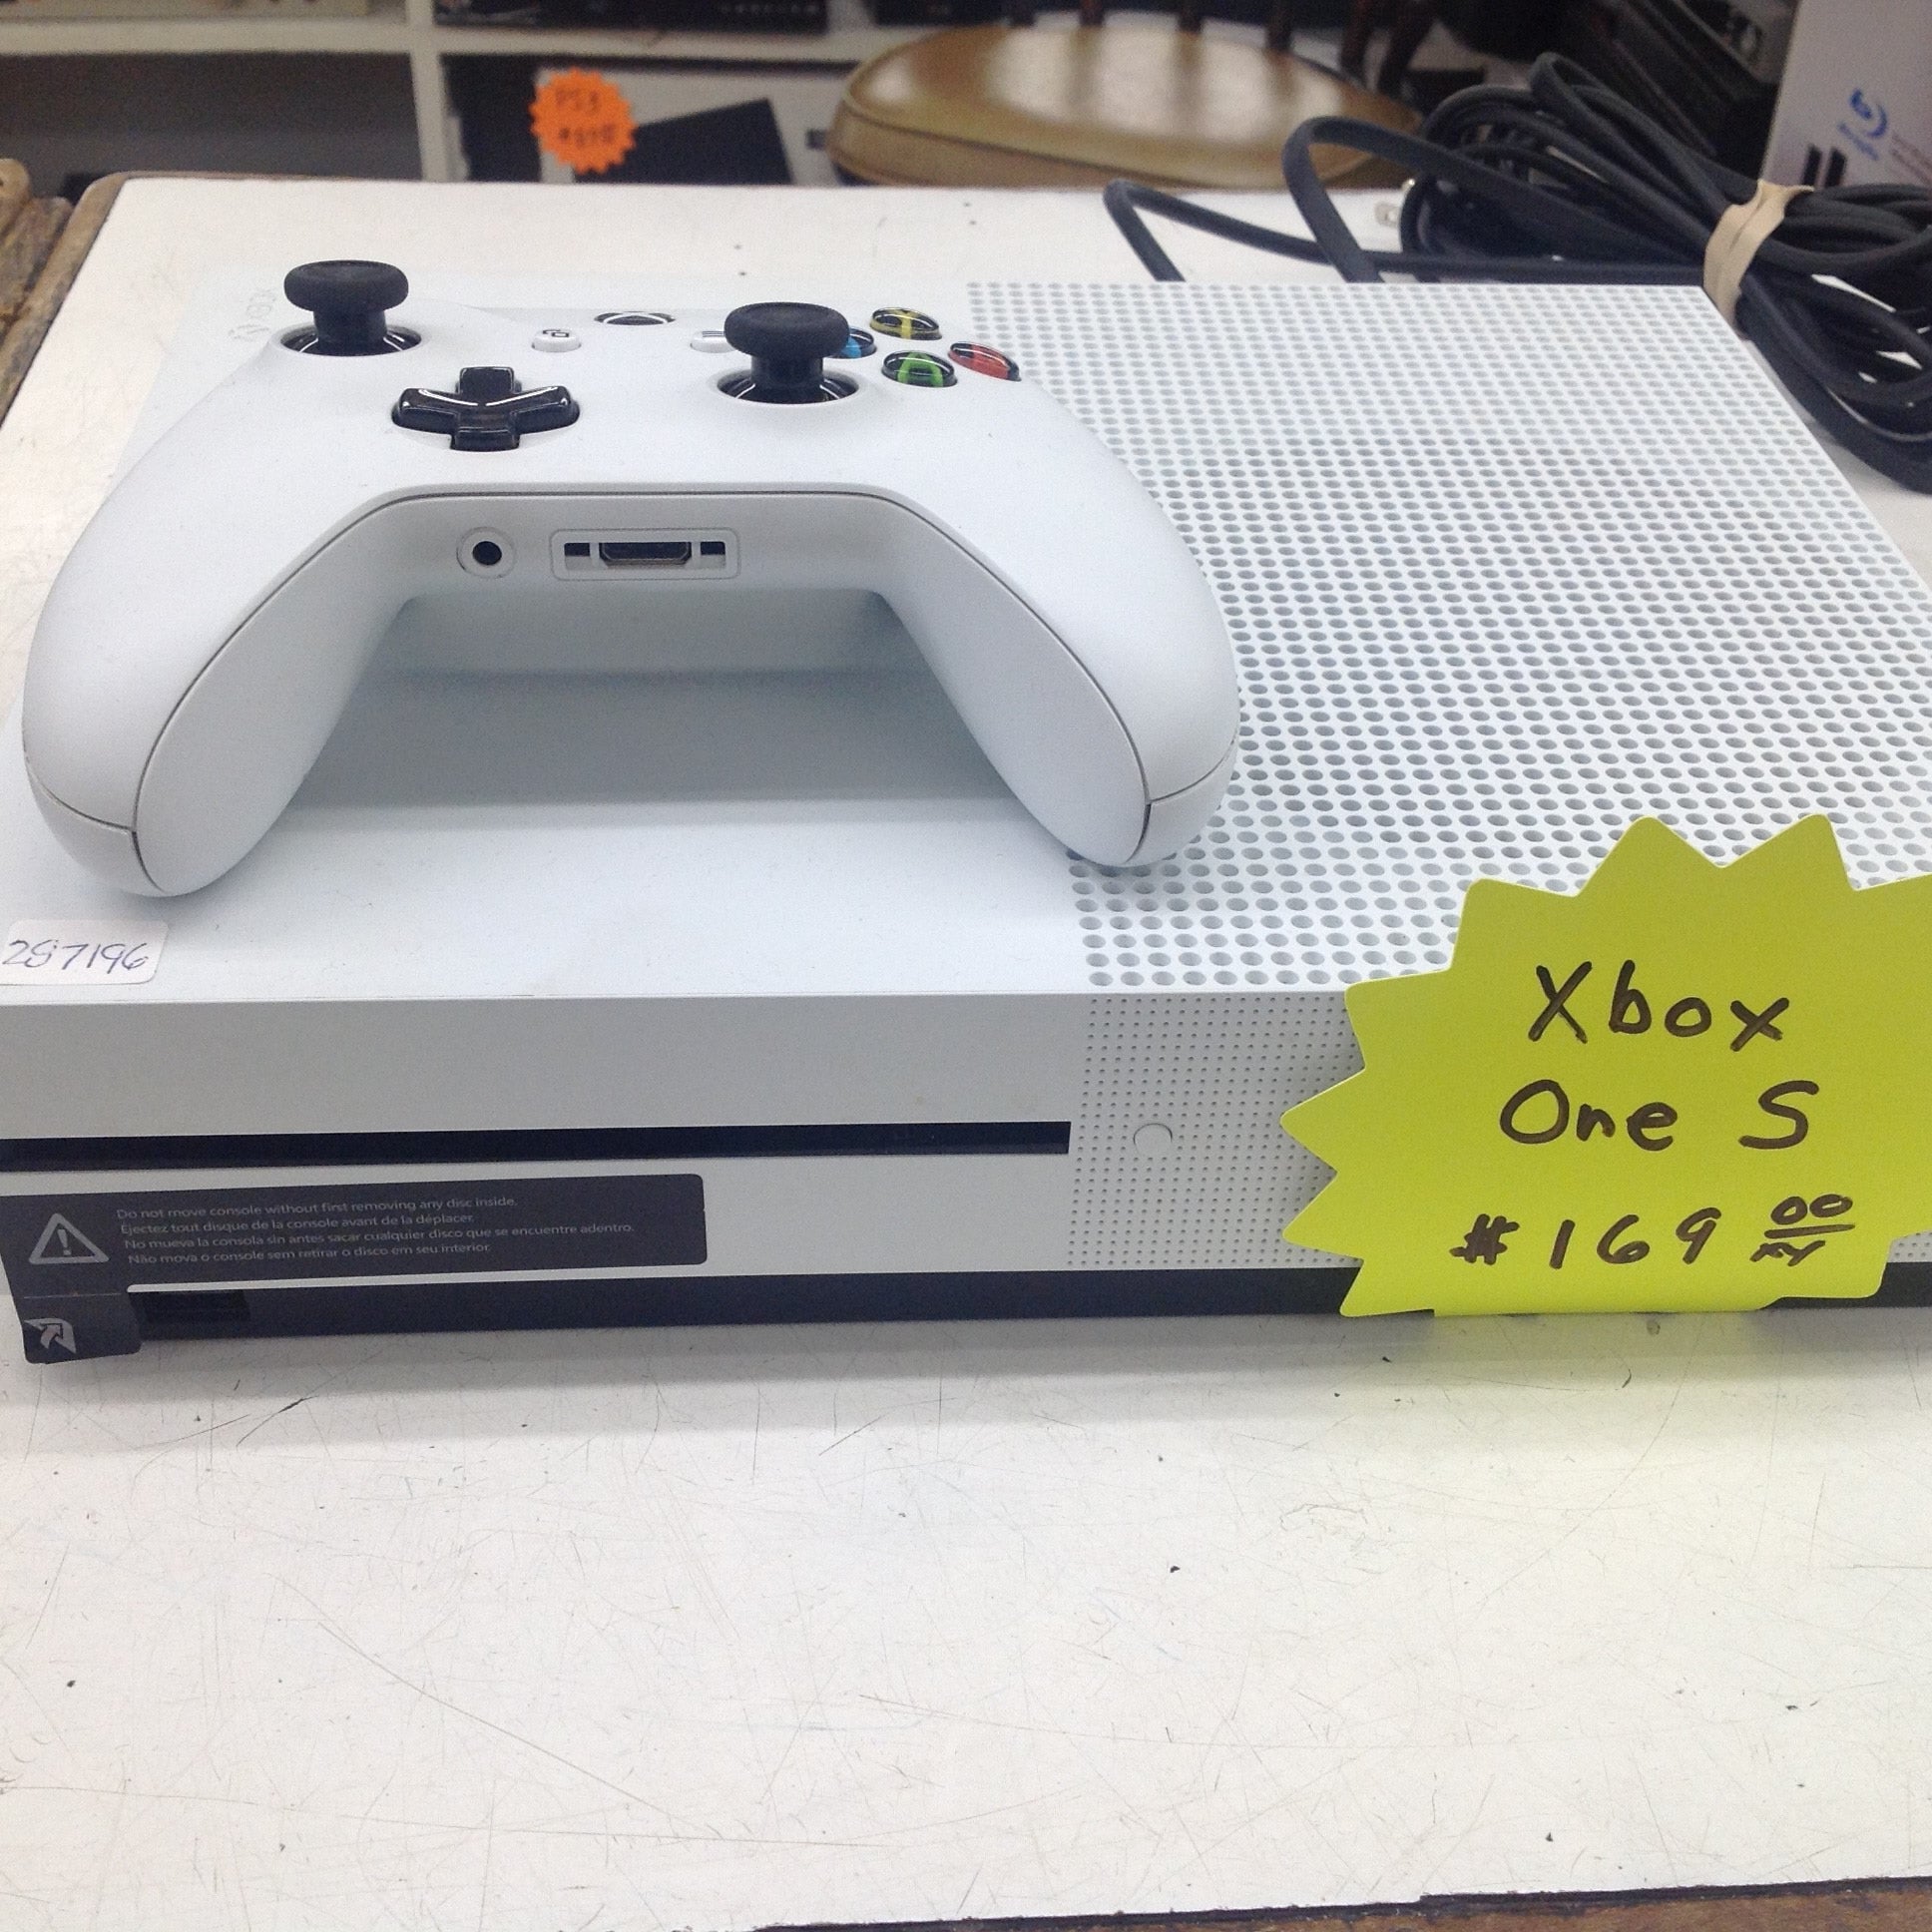 How Much Can You Pawn an Xbox One for?